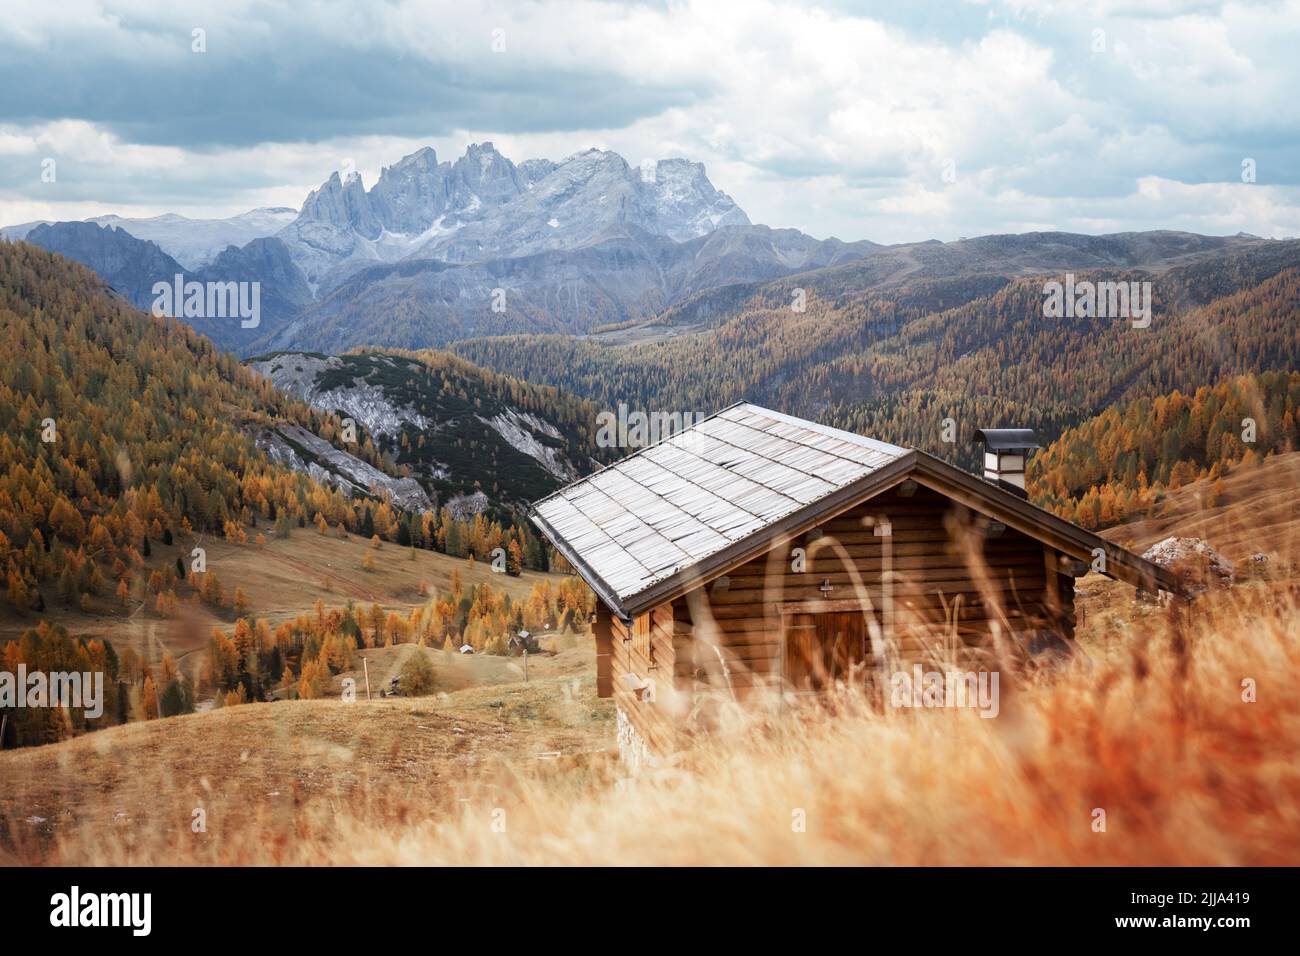 Incredible autumn view at Valfreda valley in Italian Dolomite Alps. Wooden cabin, yellow grass, orange larches forest and snowy mountains peaks on background. Dolomites, Italy. Landscape photography Stock Photo